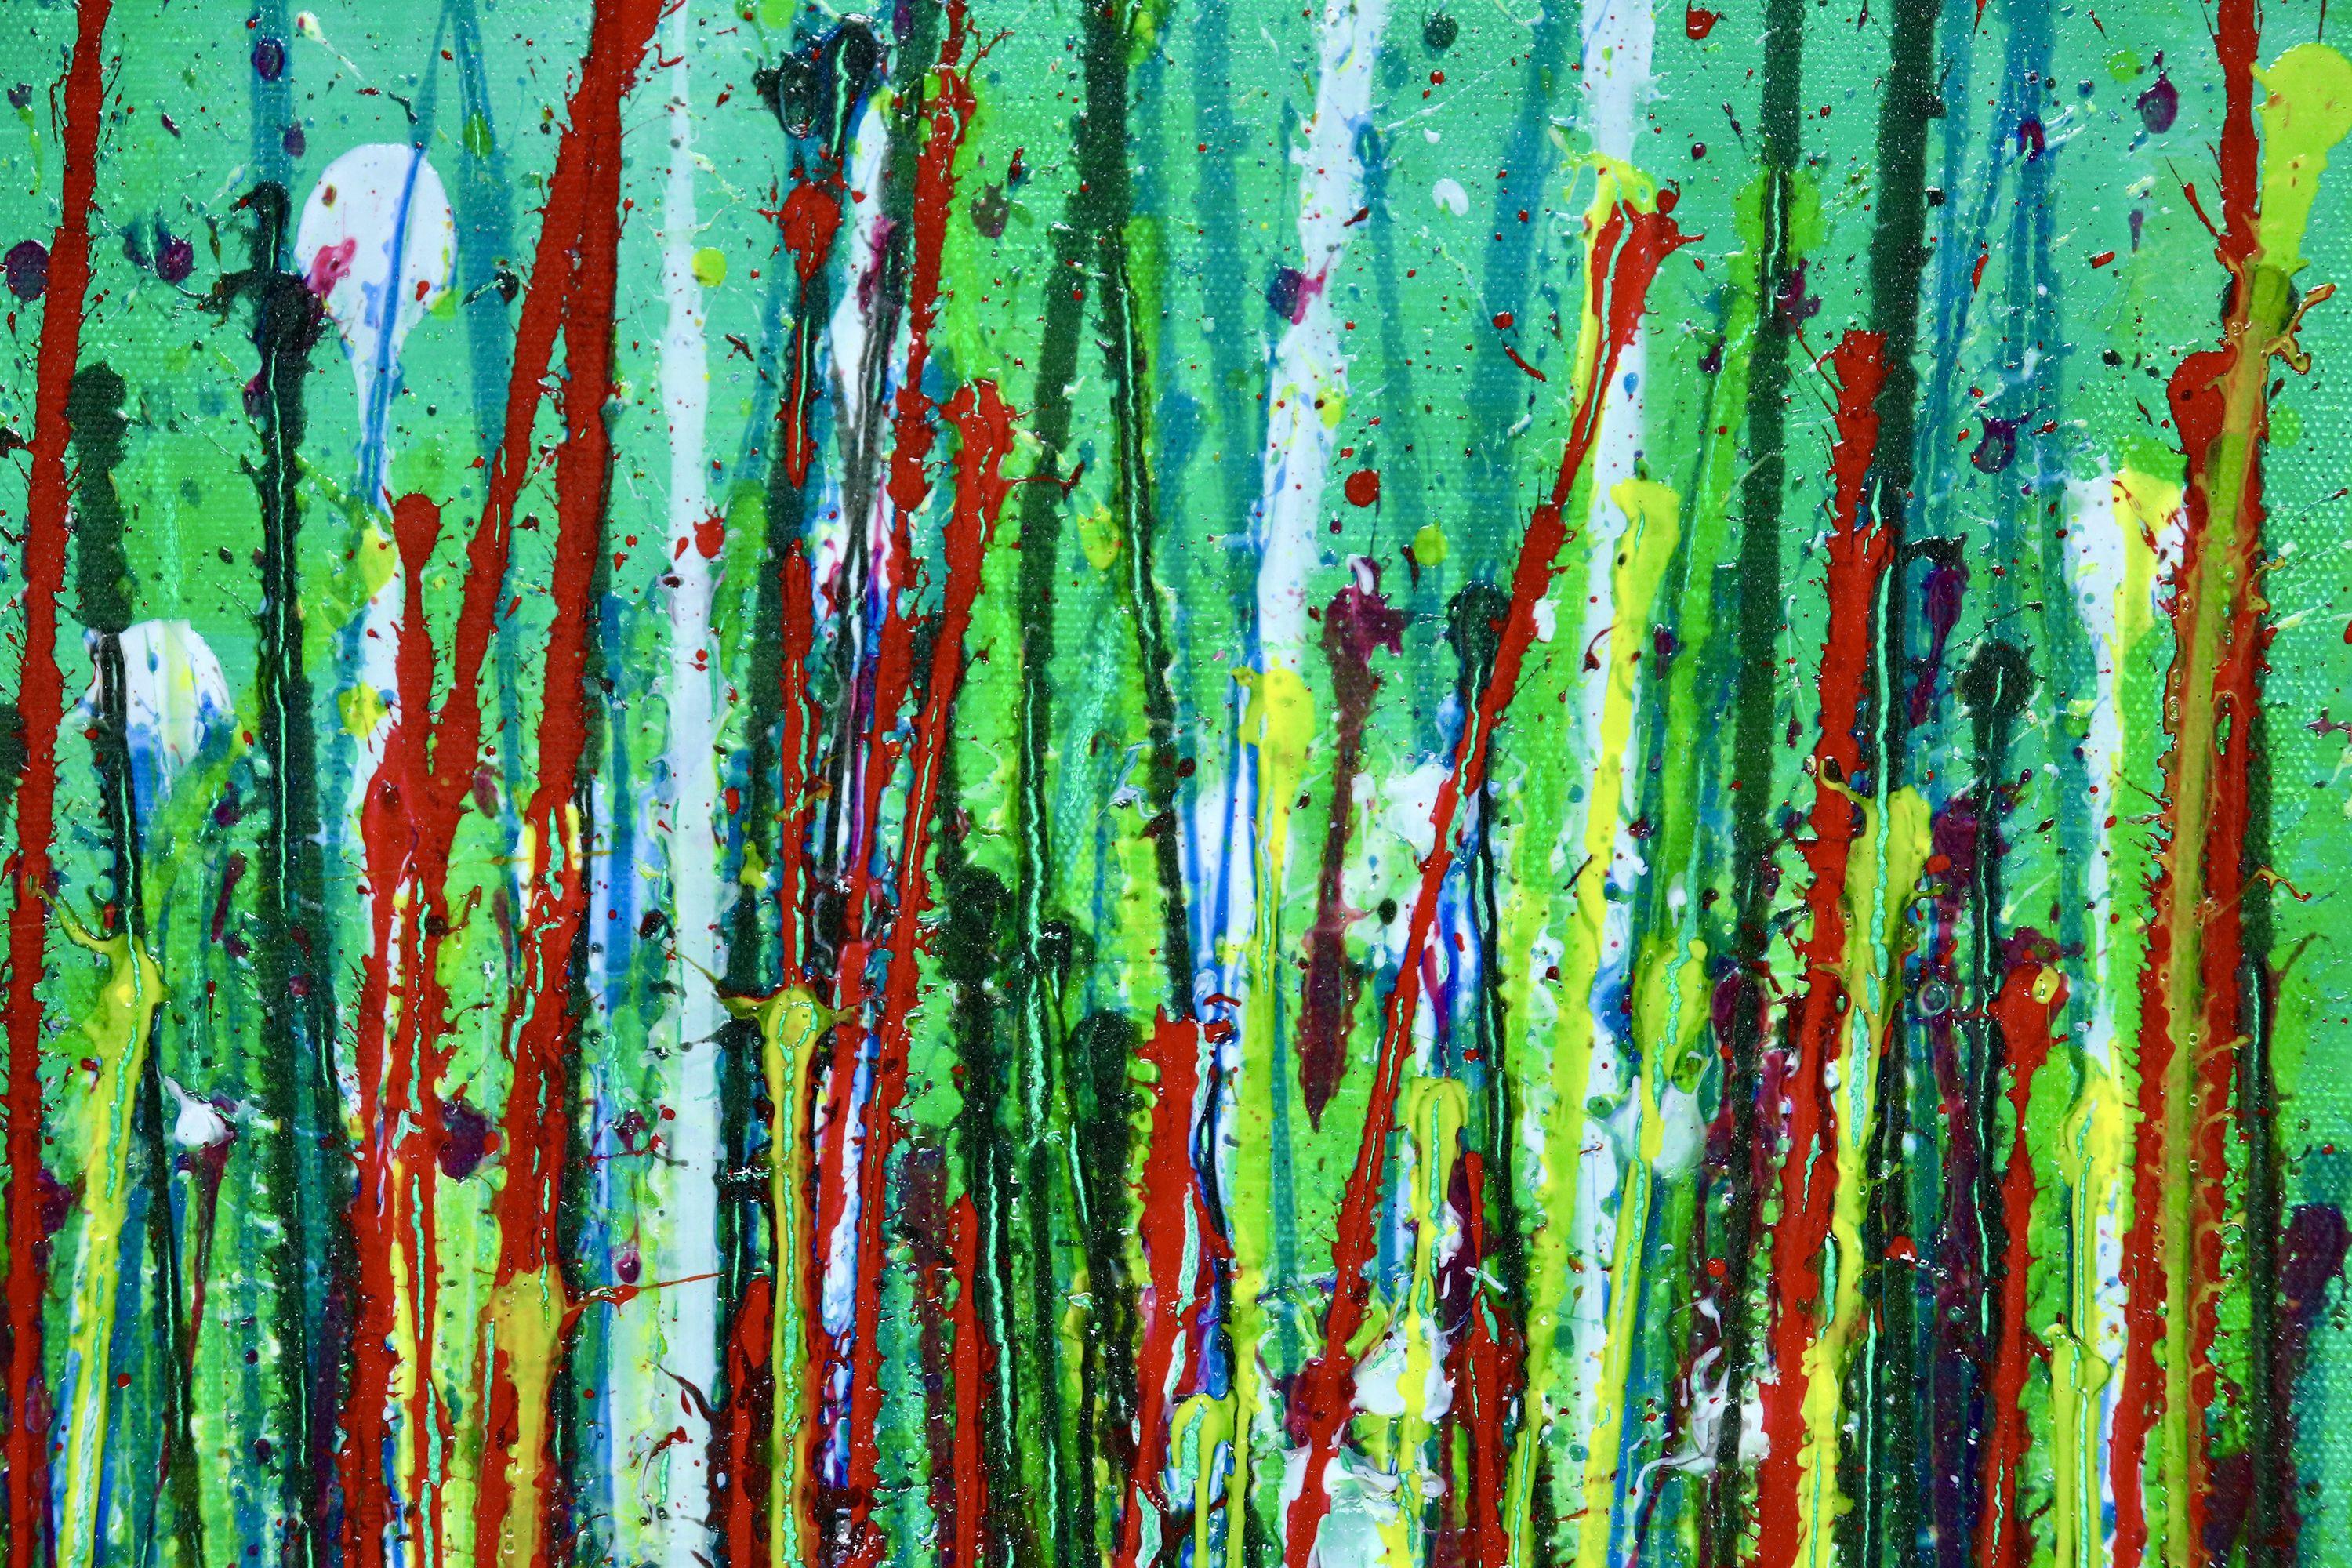 Daydream panorama (Natures imagery) 13, Painting, Acrylic on Canvas 1